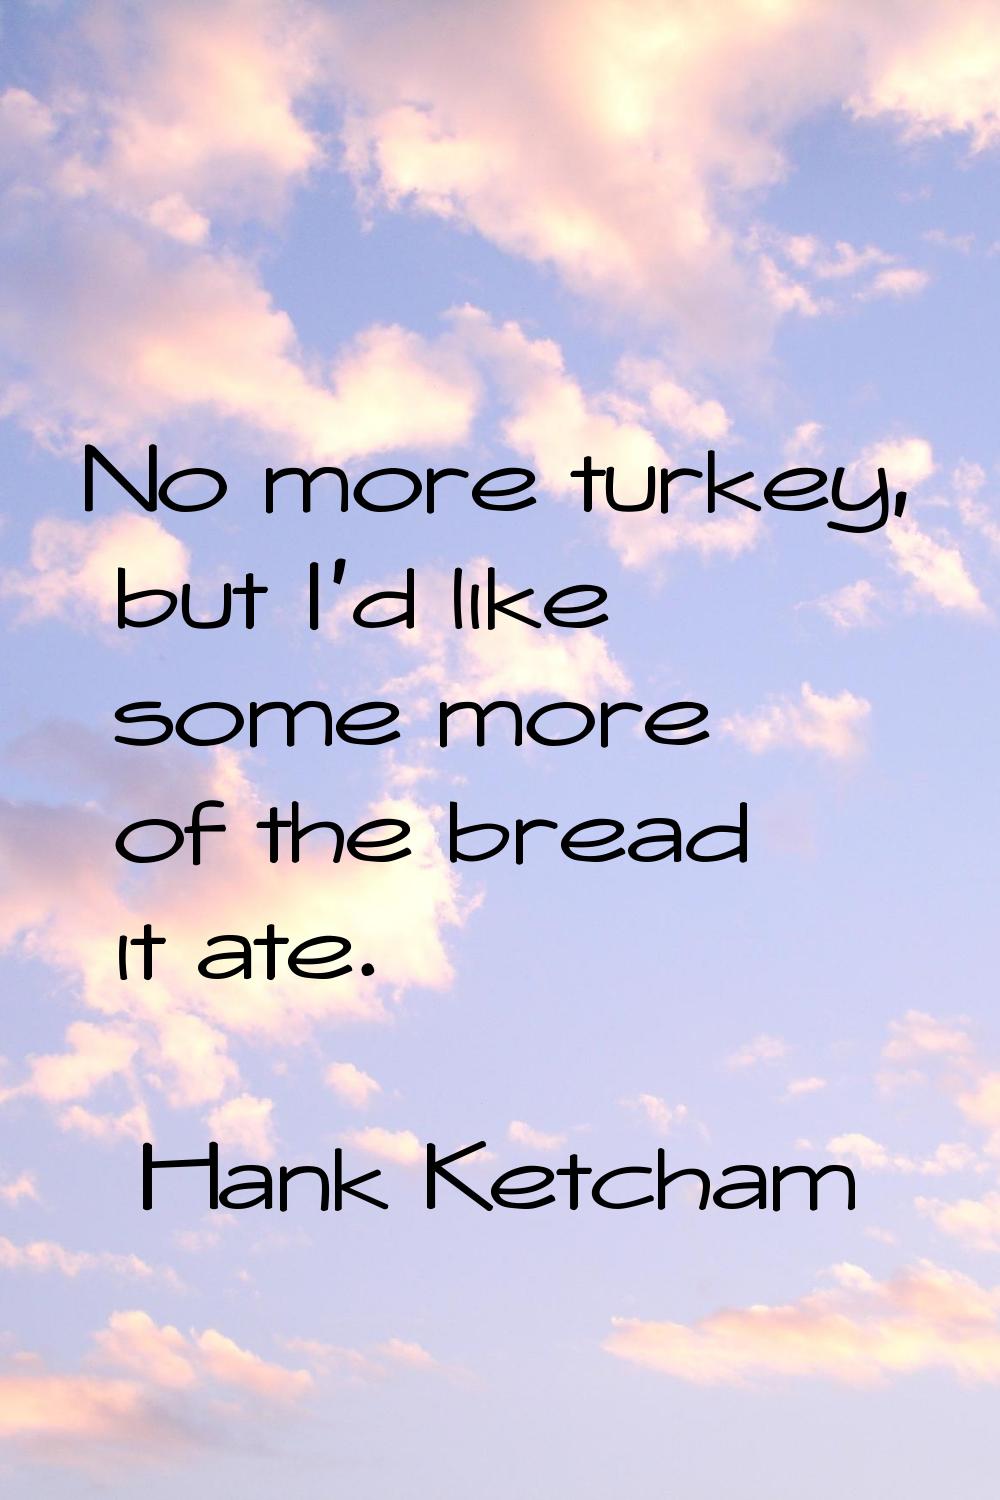 No more turkey, but I'd like some more of the bread it ate.